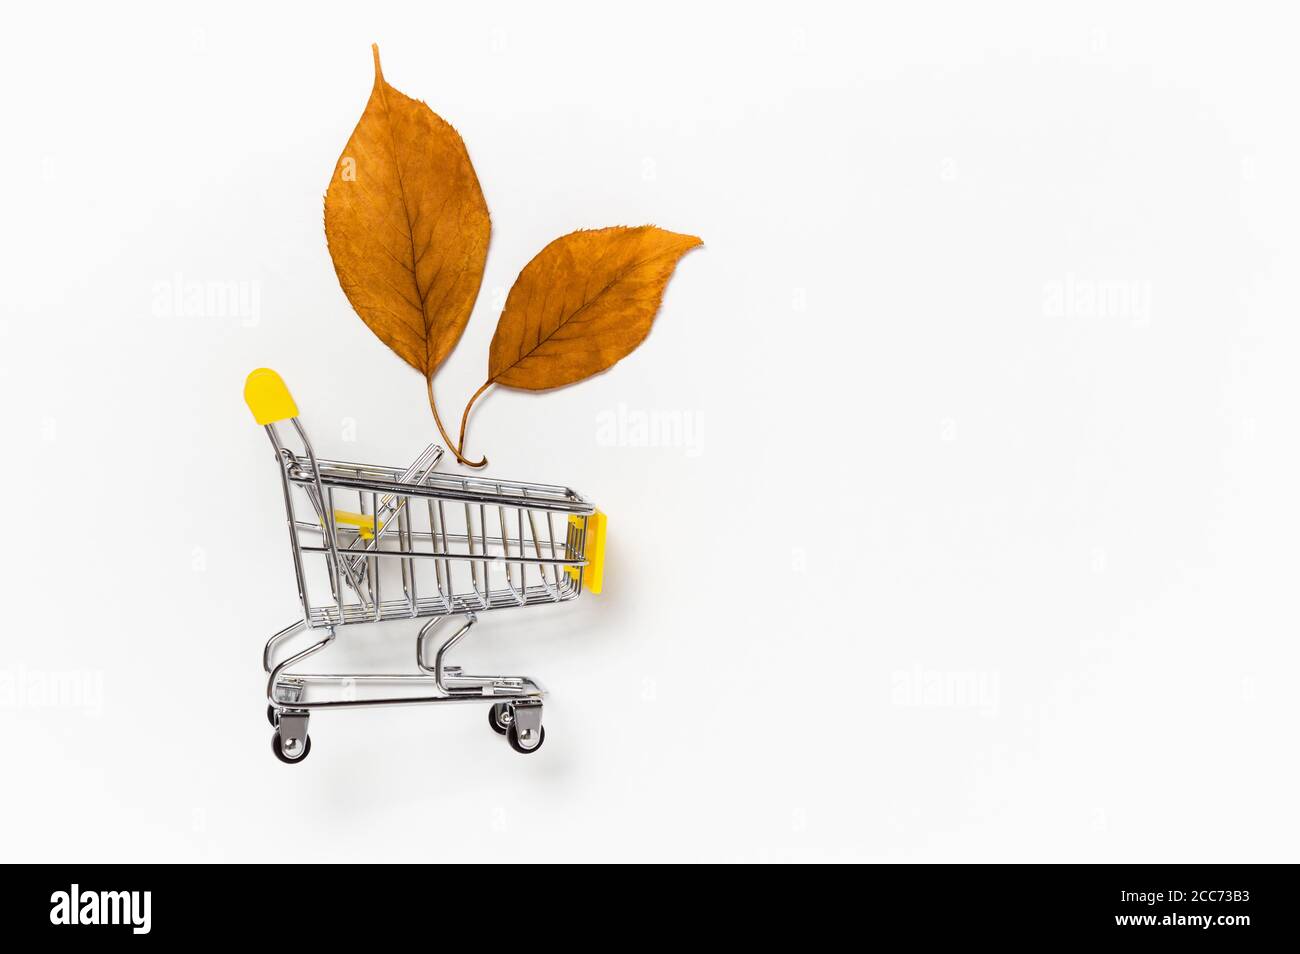 Autumn sale: shopping cart with two yellow fall leaves on white background. Seasonal sale or fall discount deal with copy space for your text Stock Photo